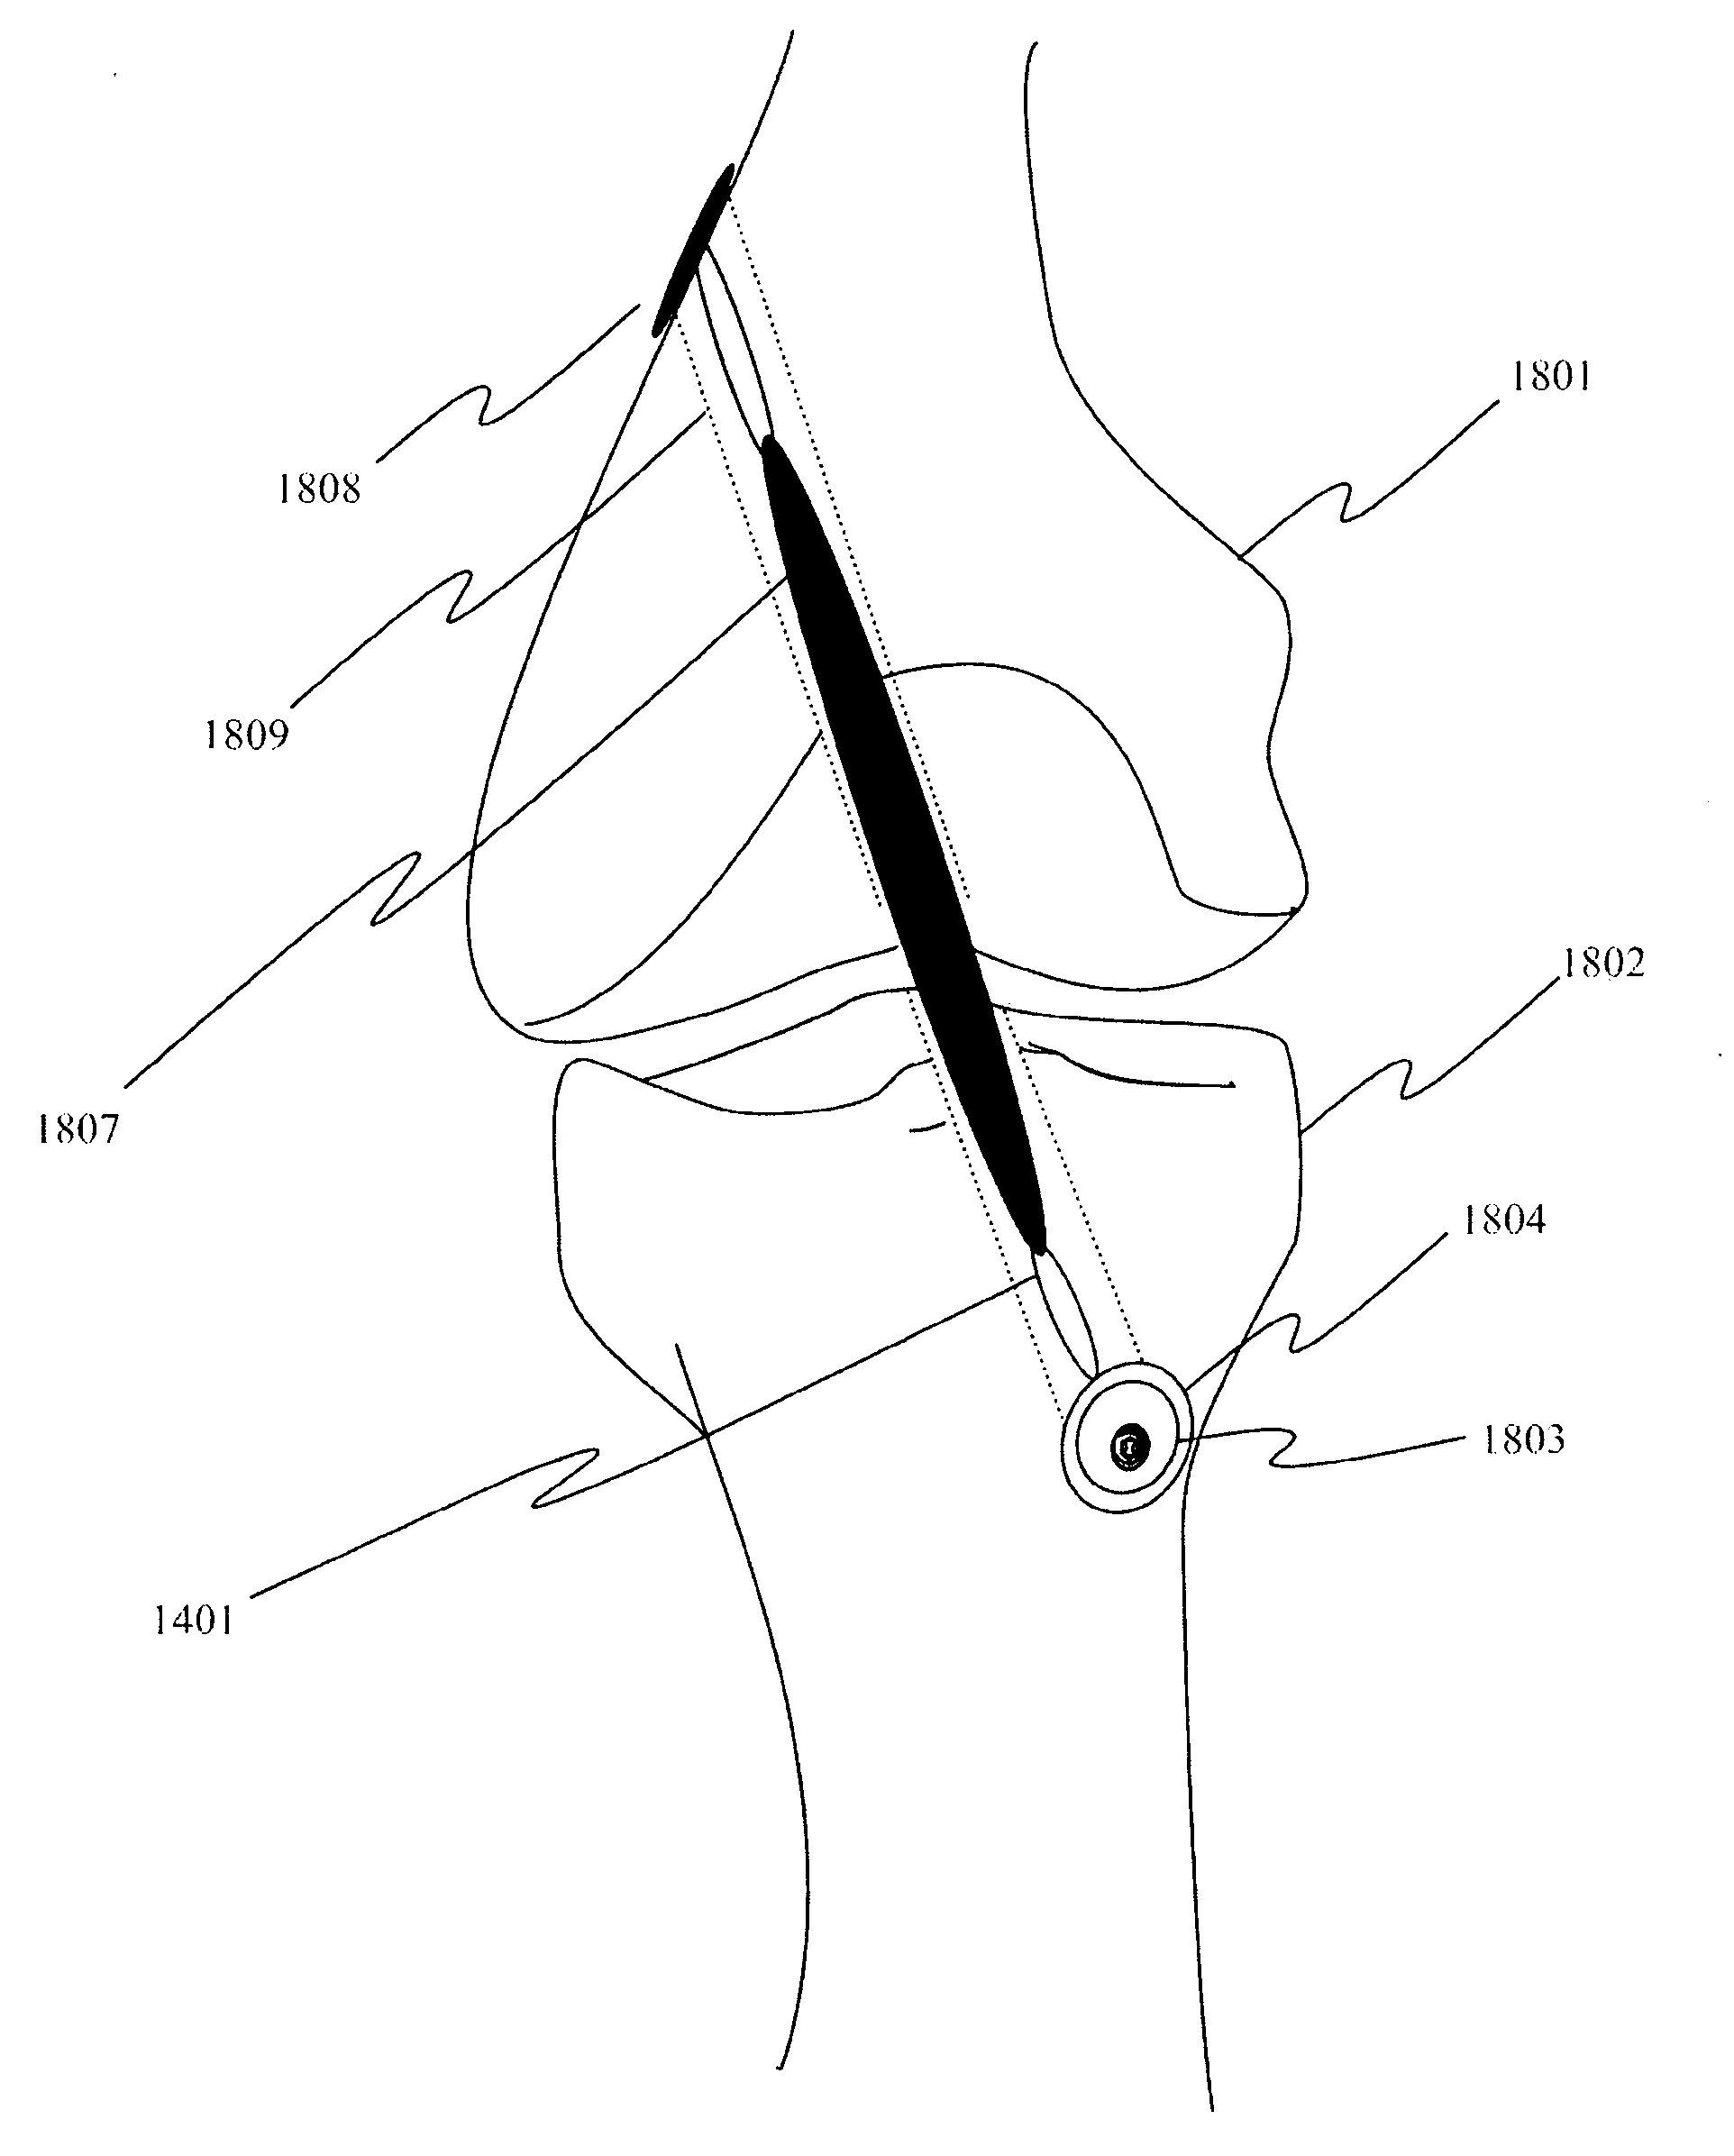 Method and apparatus for aperture fixation by securing flexible material with a knotless fixation device